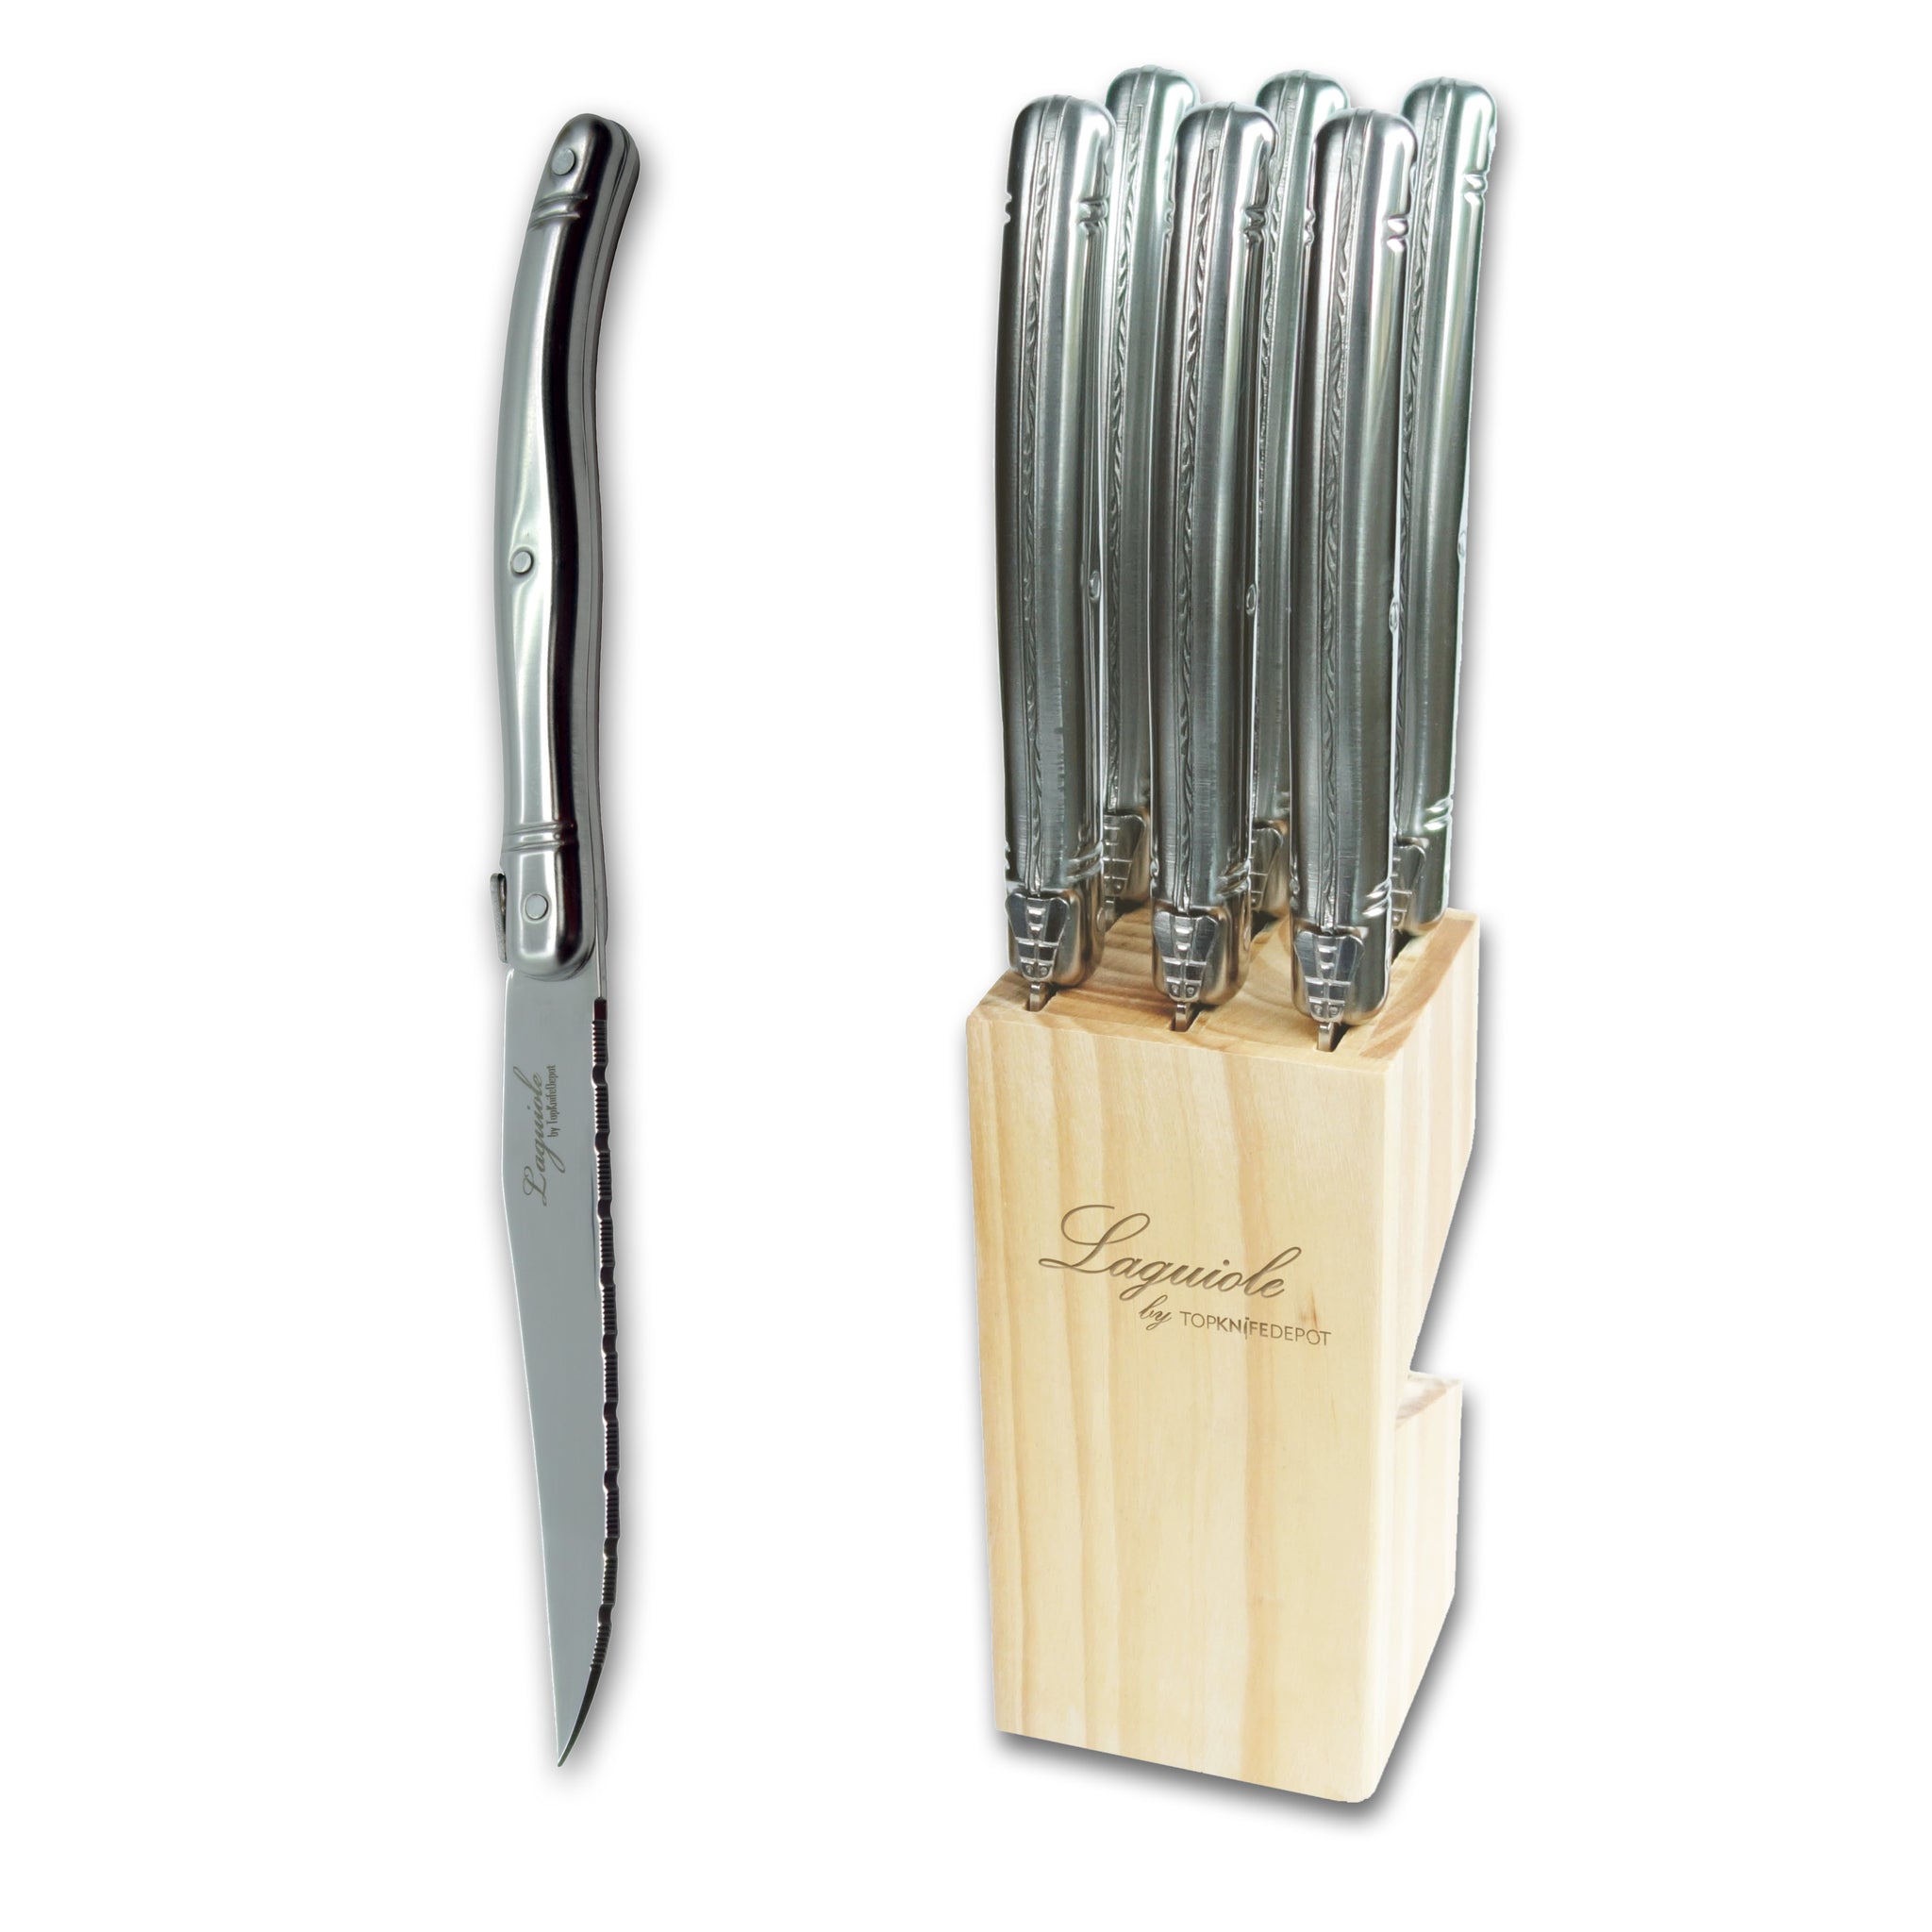 Rustic Style Steak Knife Set in 6 different woods Smooth Blade - I